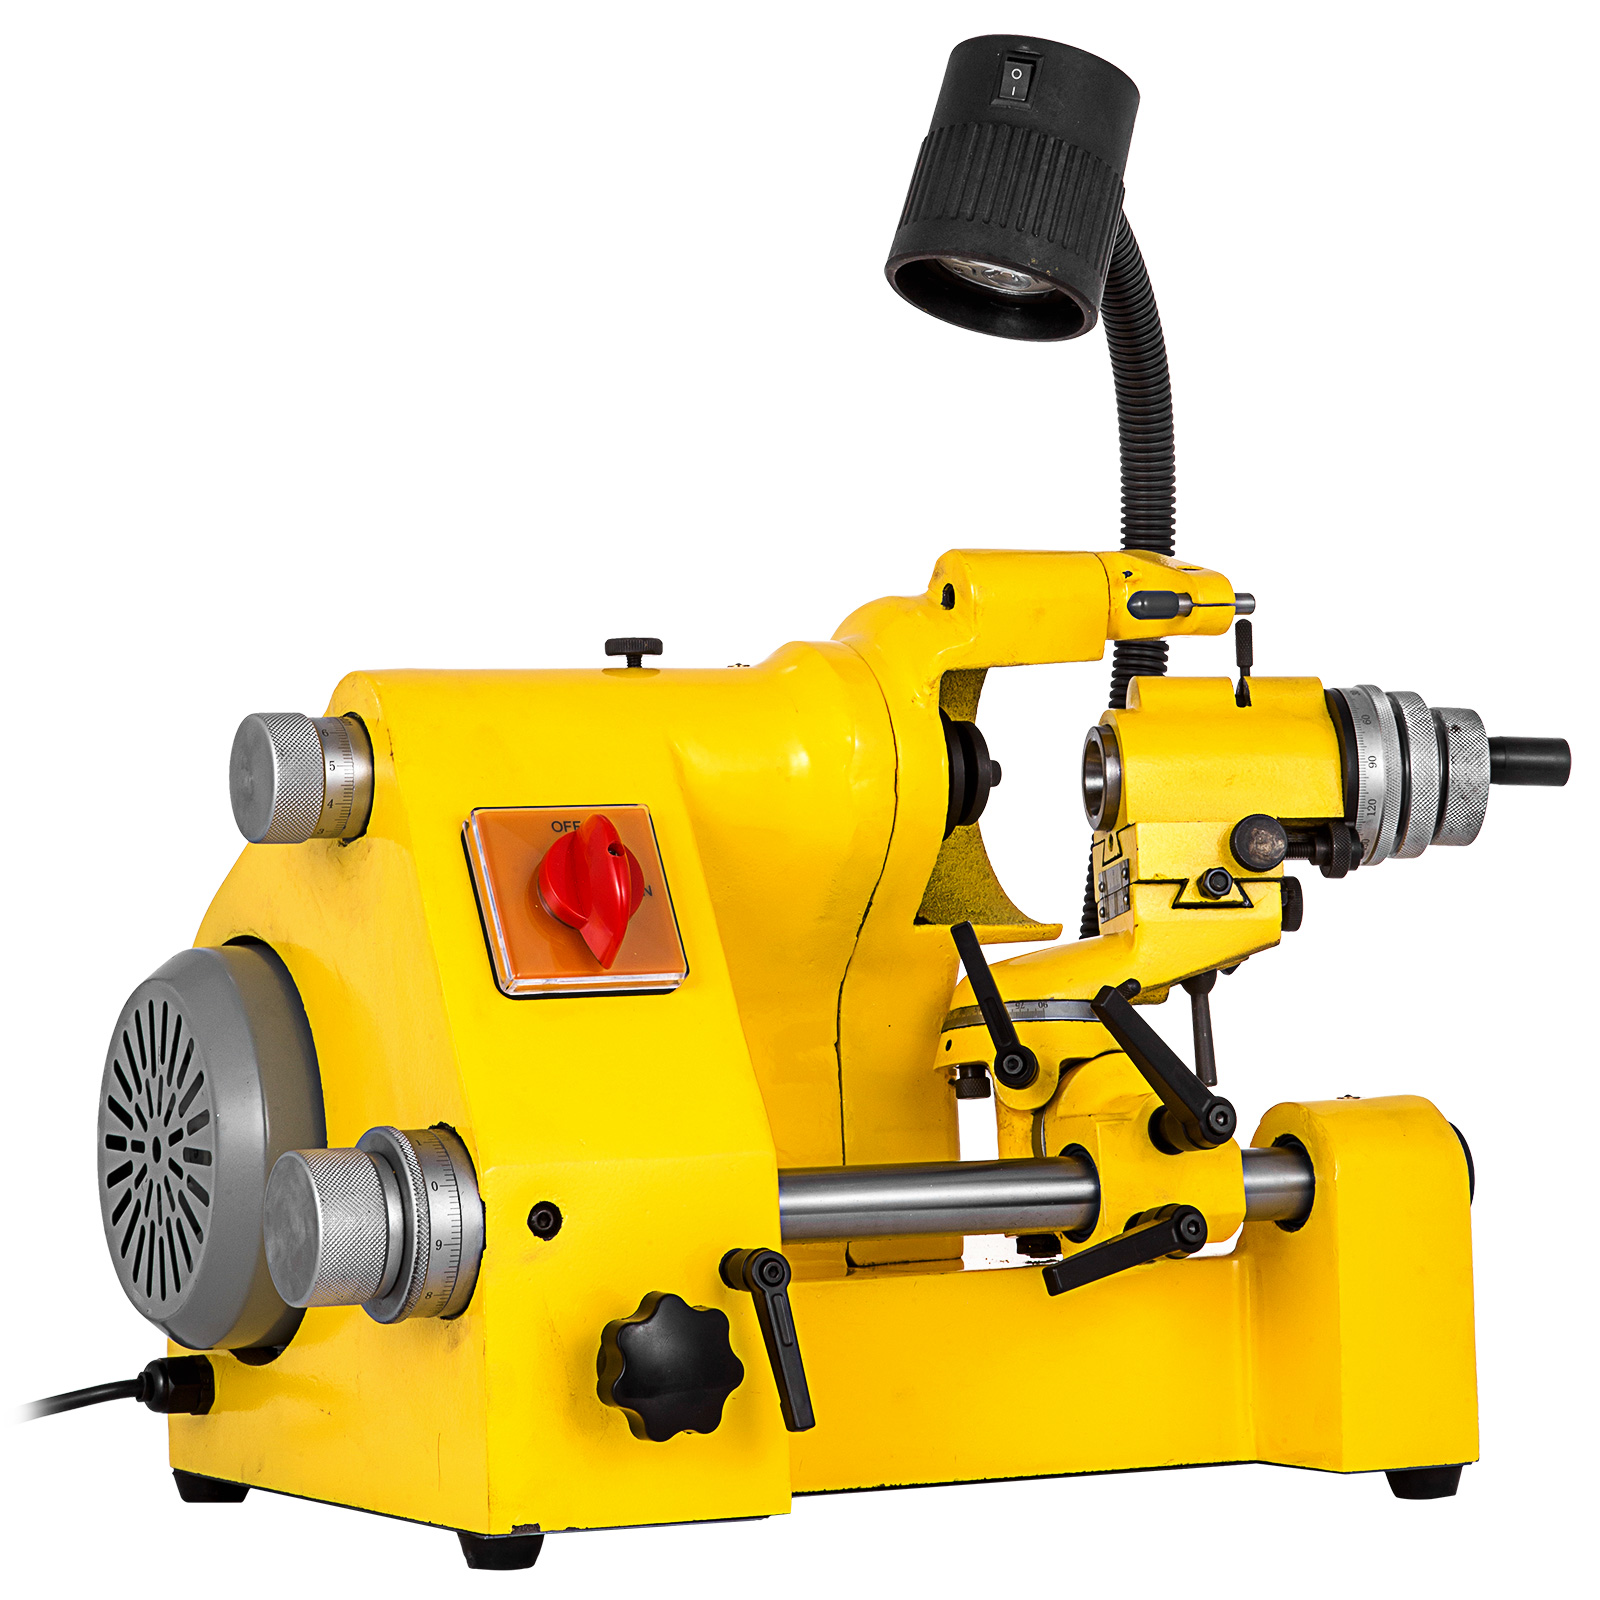 difference between a u2 and a u3 cutter grinder